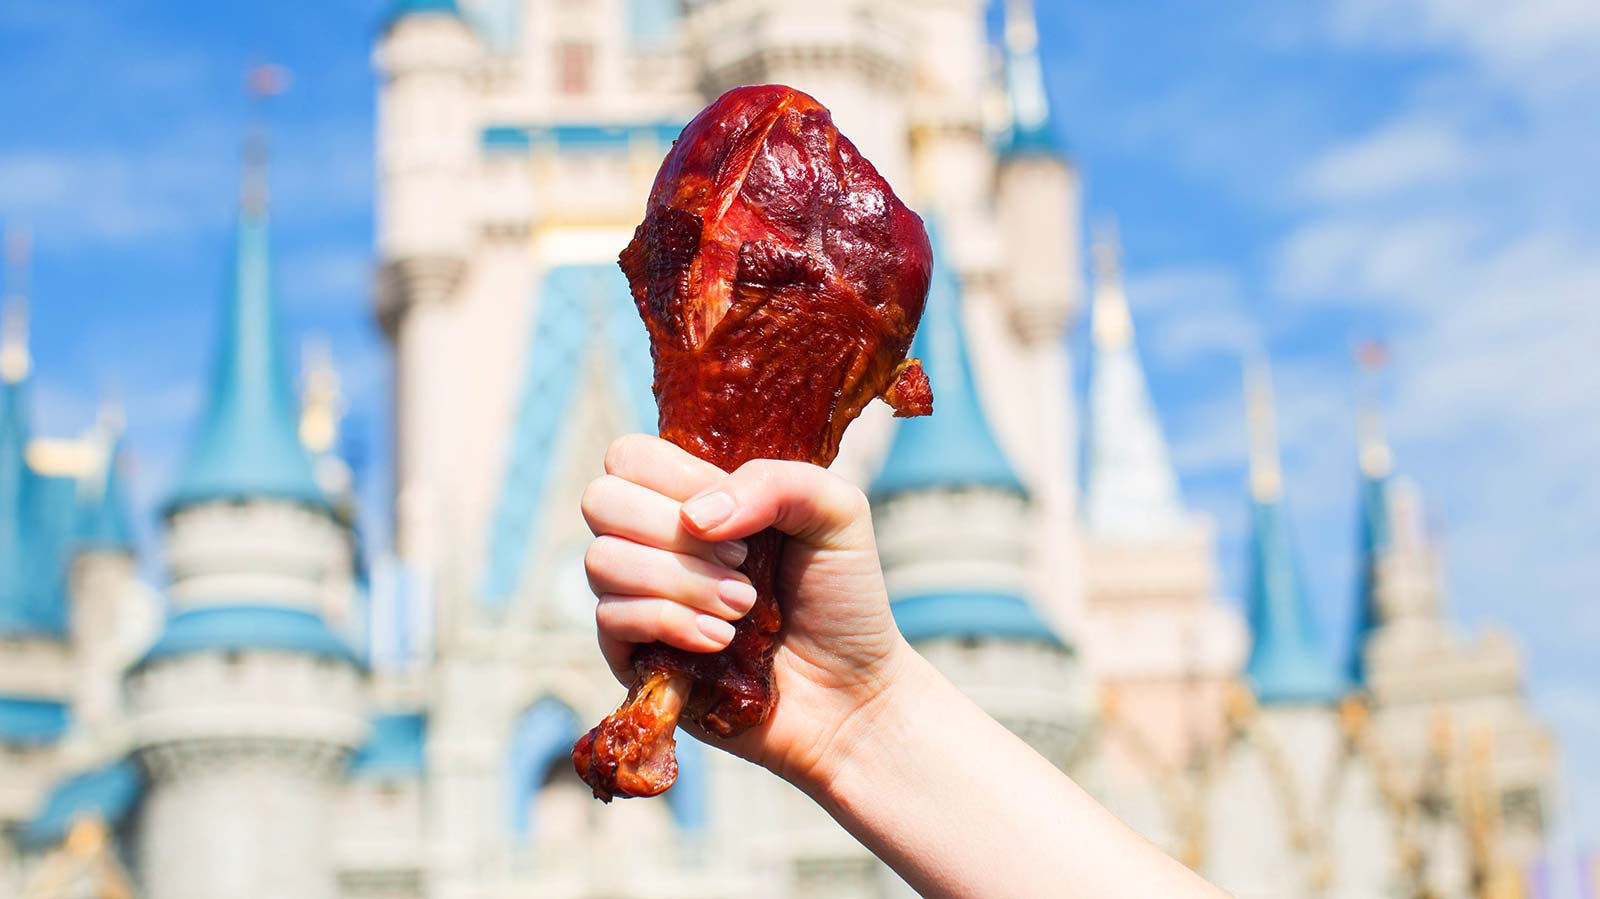 Does Your Real Age Match Your Taste Buds’ Age? Pick a Food for Each of These 16 Ingredients to Find Out Smoked Turkey Leg